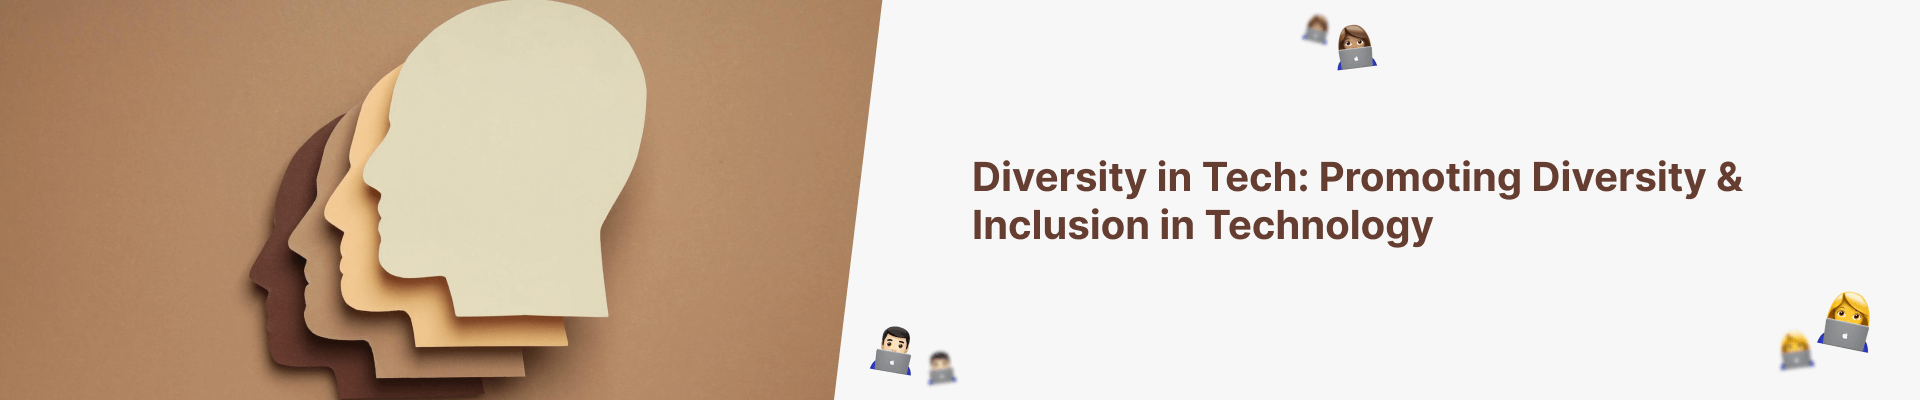 Diversity in Tech Promoting Diversity & Inclusion in Technology